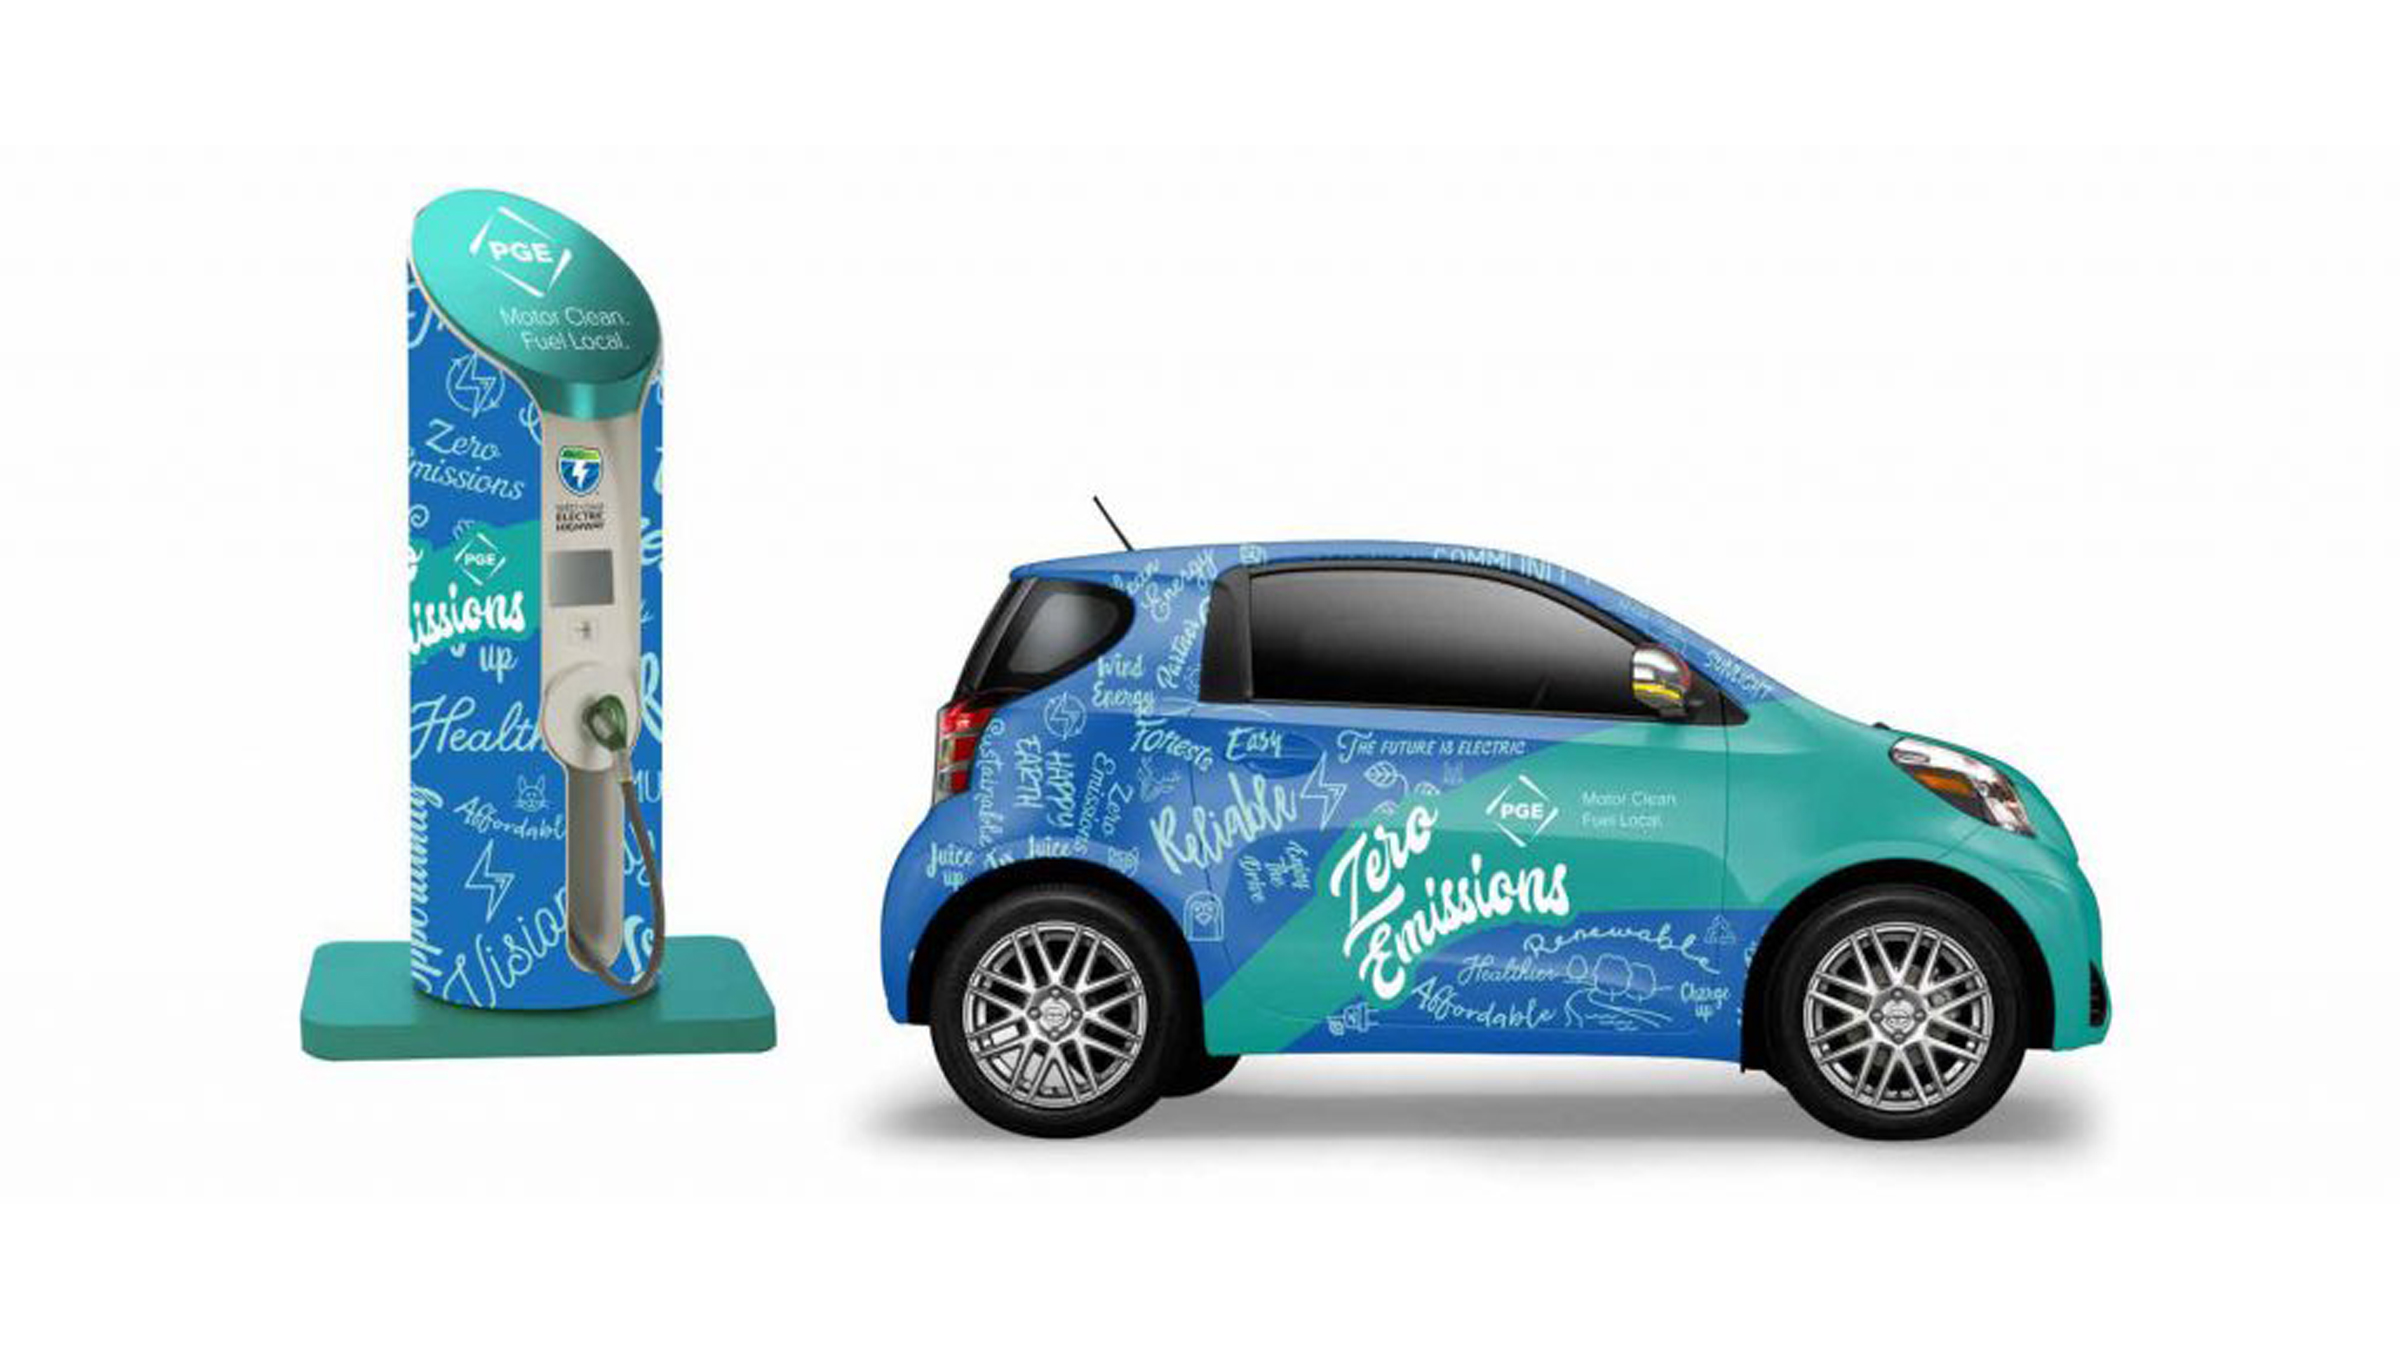 Portland General Electric ad campaign electric vehicle and charging station